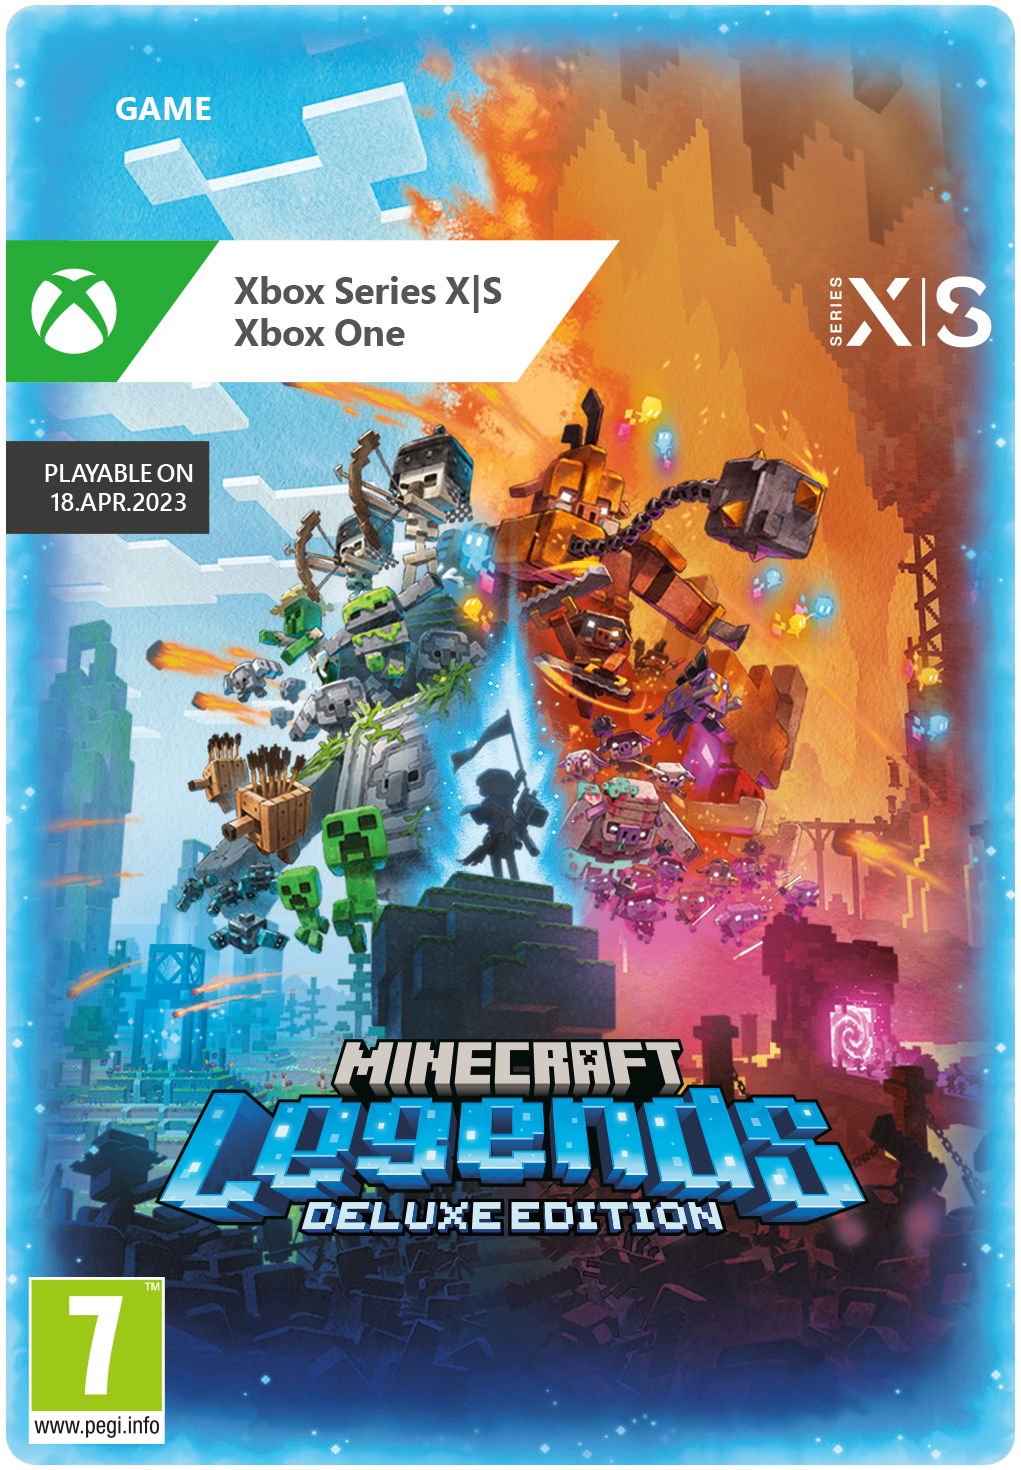 Minecraft Legends Deluxe Edition - Xbox Series X|S/One - 15th Anniversary Sale